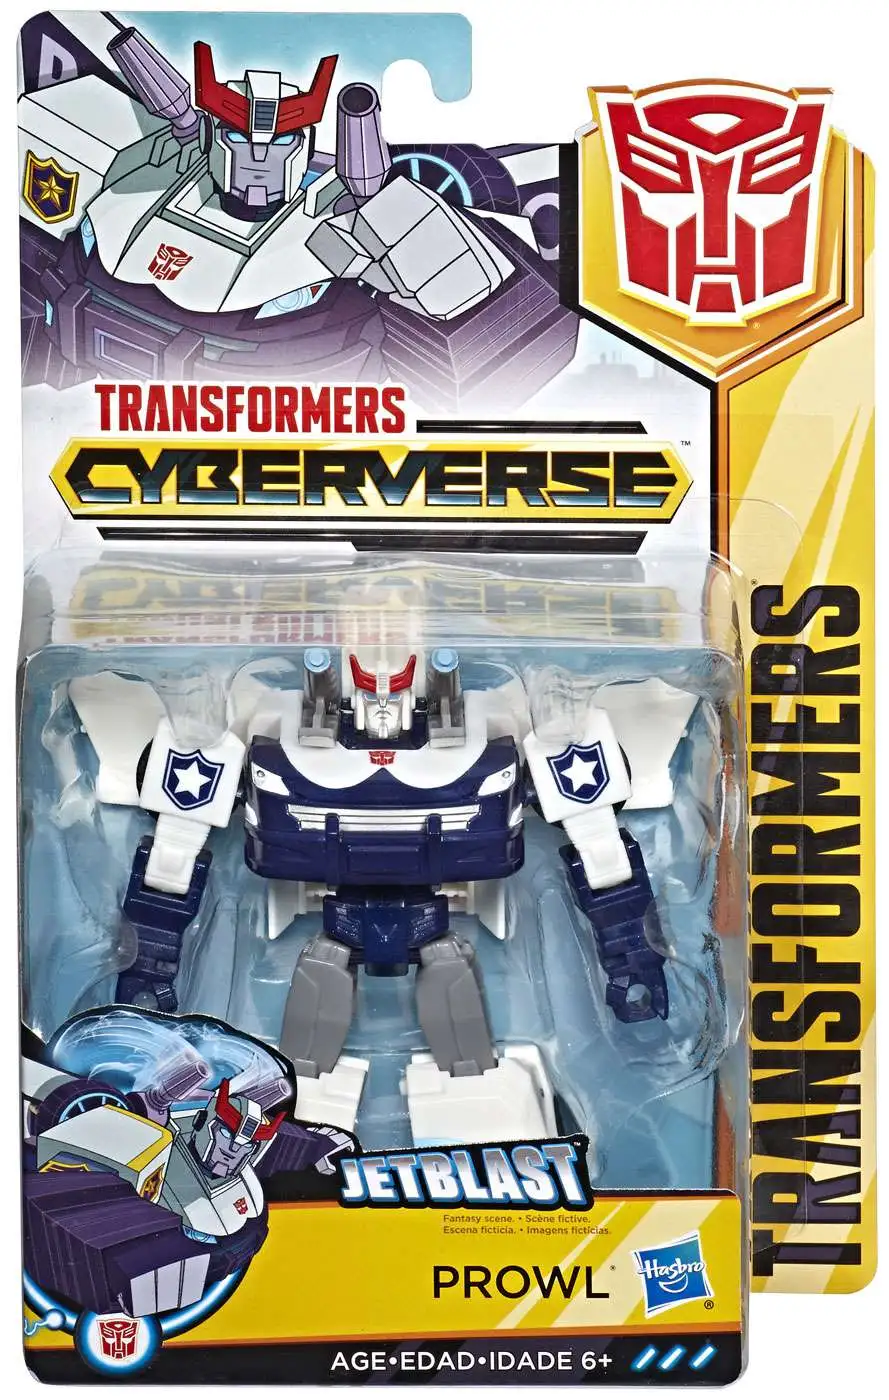 Transformers Cyberverse Prowl Action Figure 